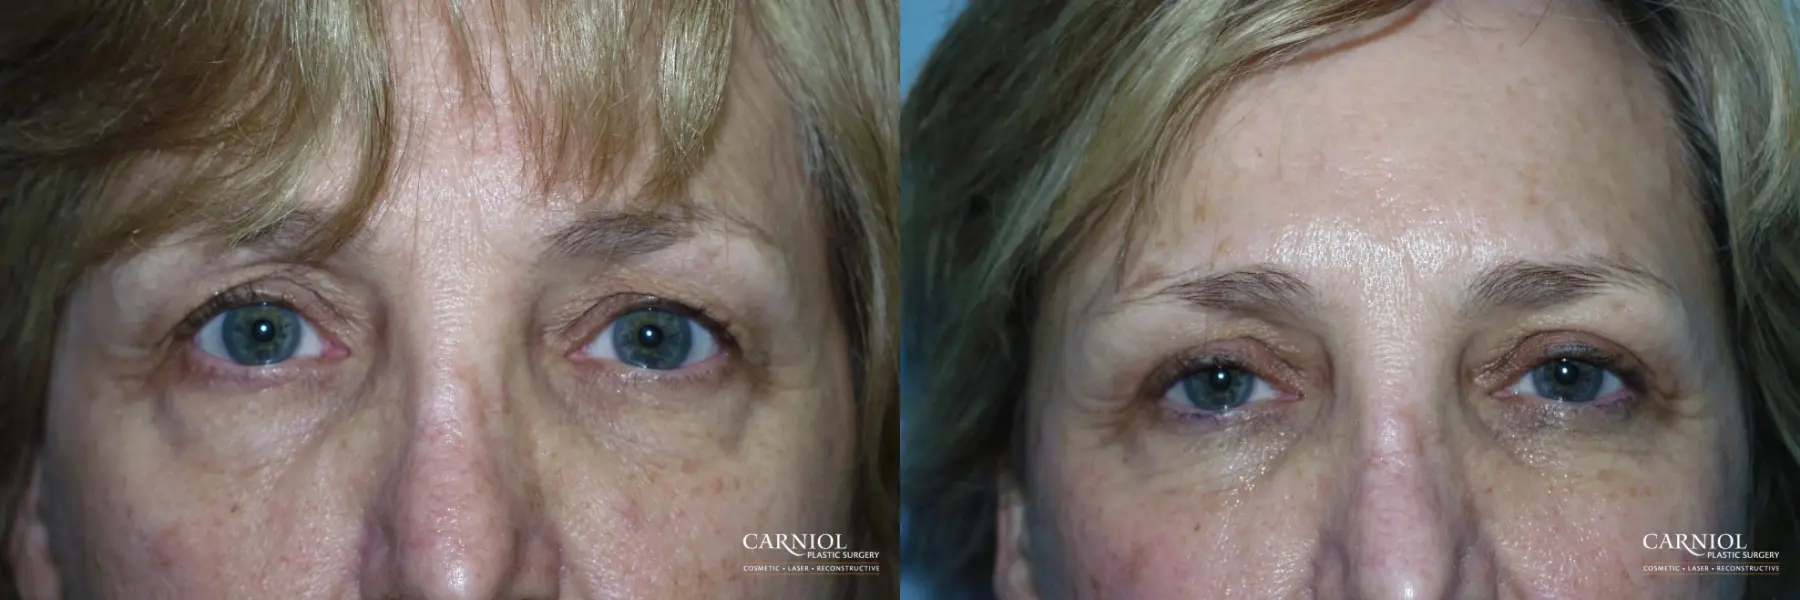 Blepharoplasty: Patient 4 - Before and After 1